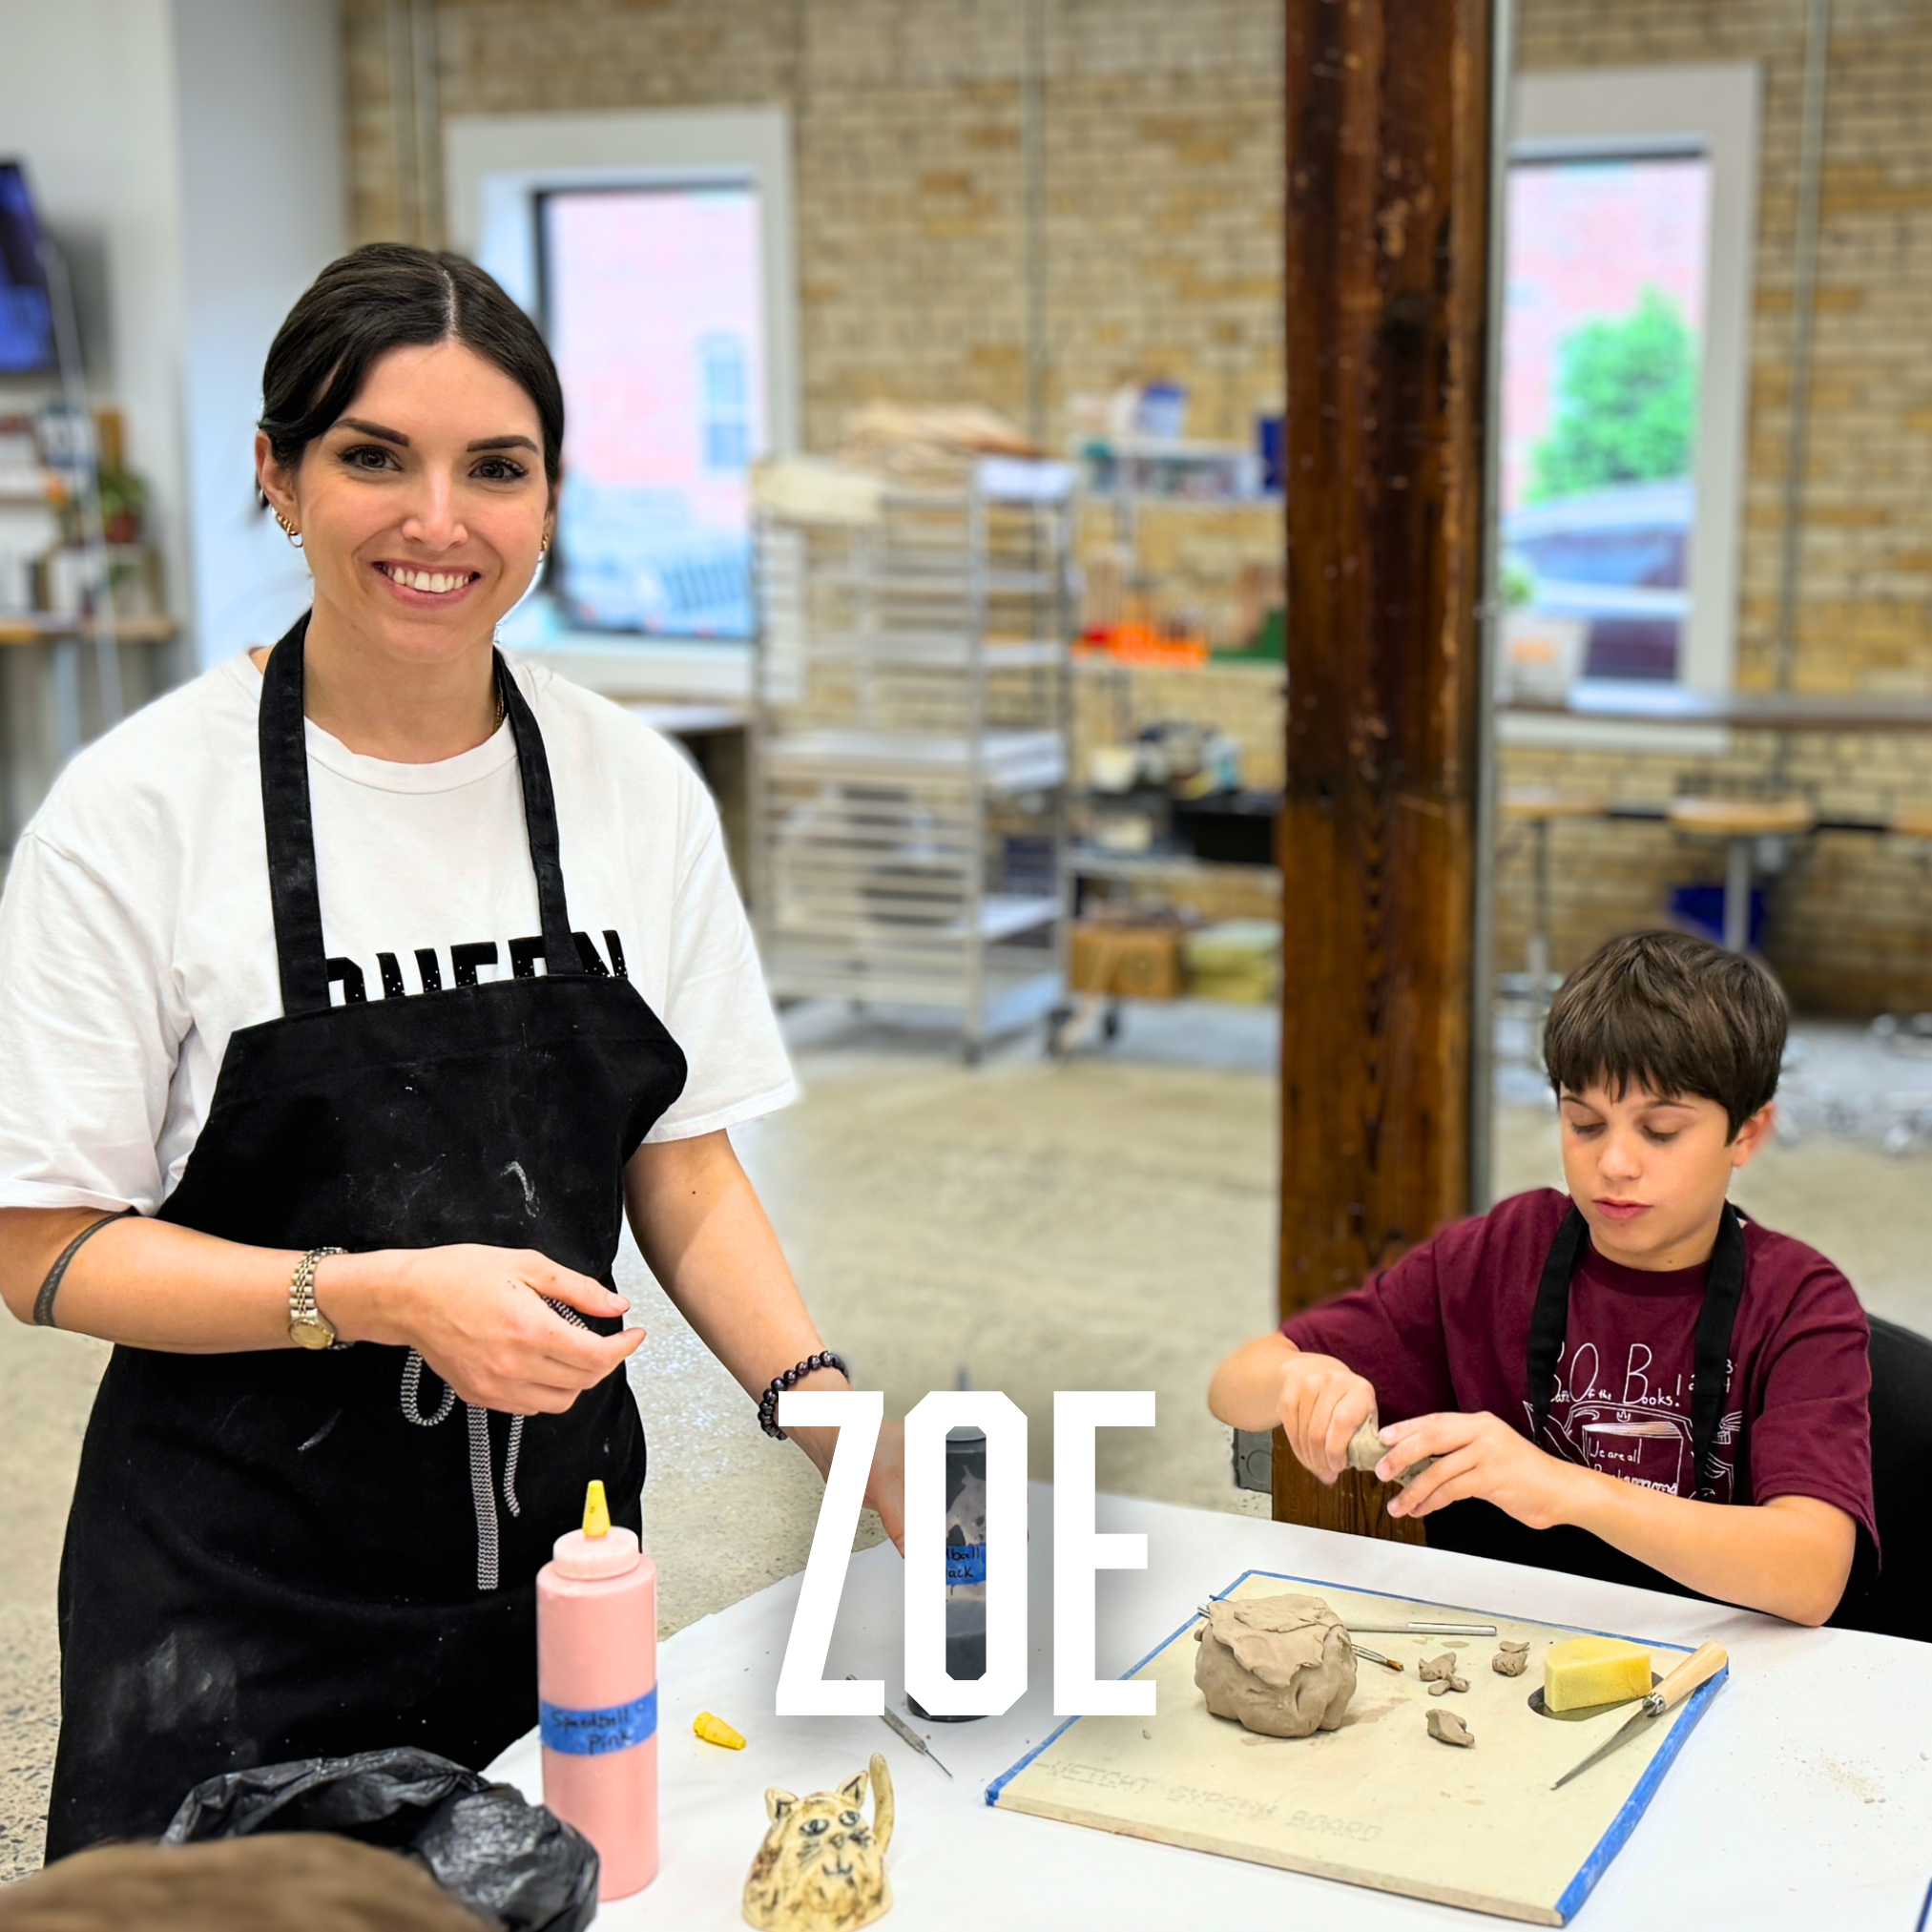 Hub Educator, Zoe, helps a student with his pottery project.